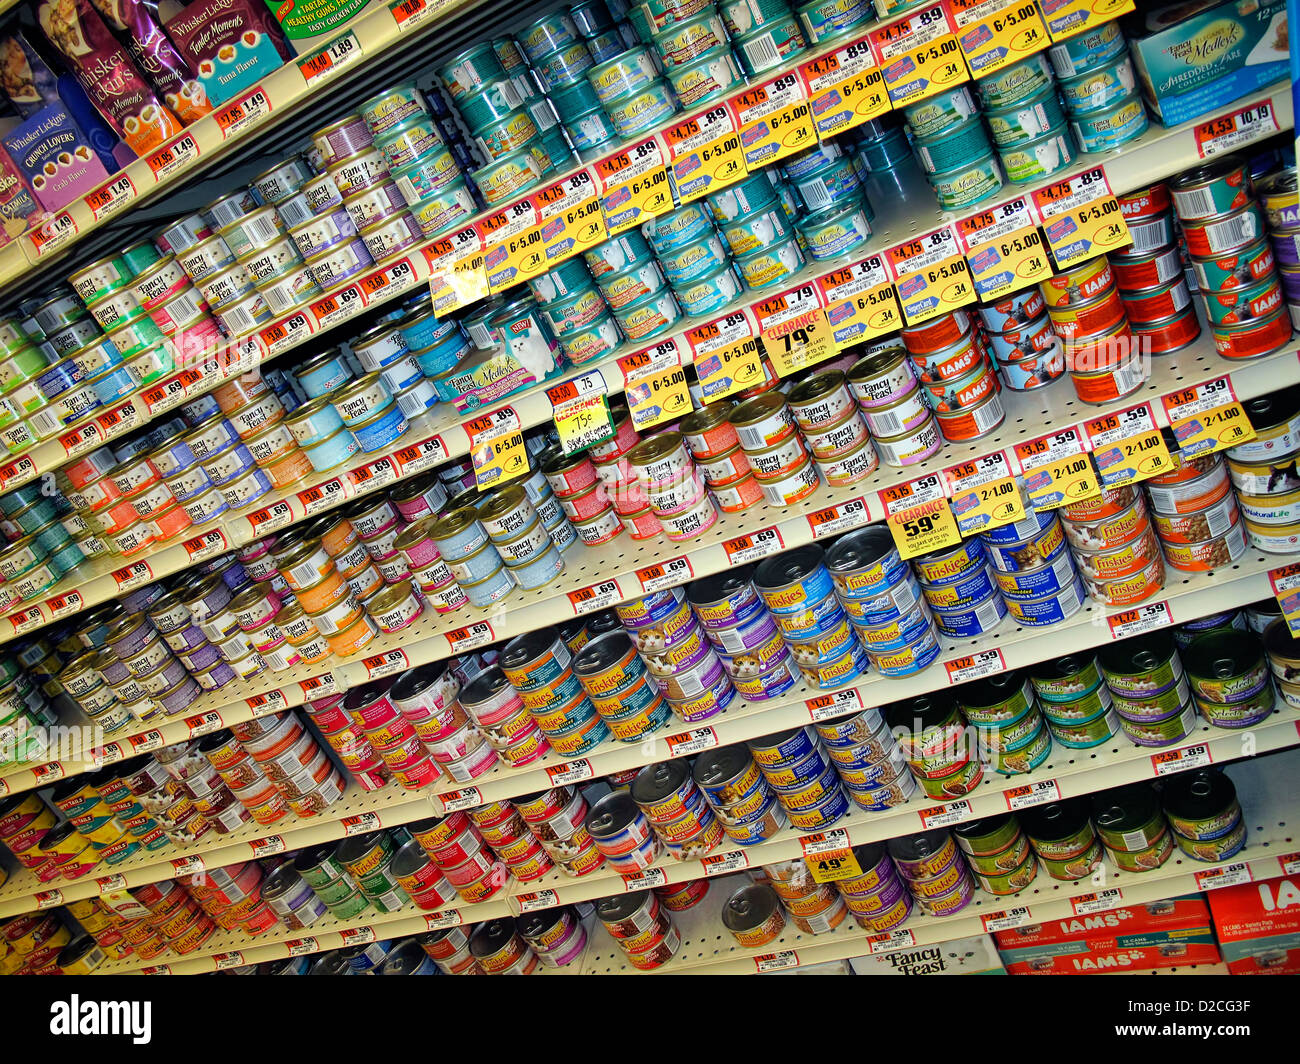 Variety of canned cat food products on a store shelf. Stock Photo